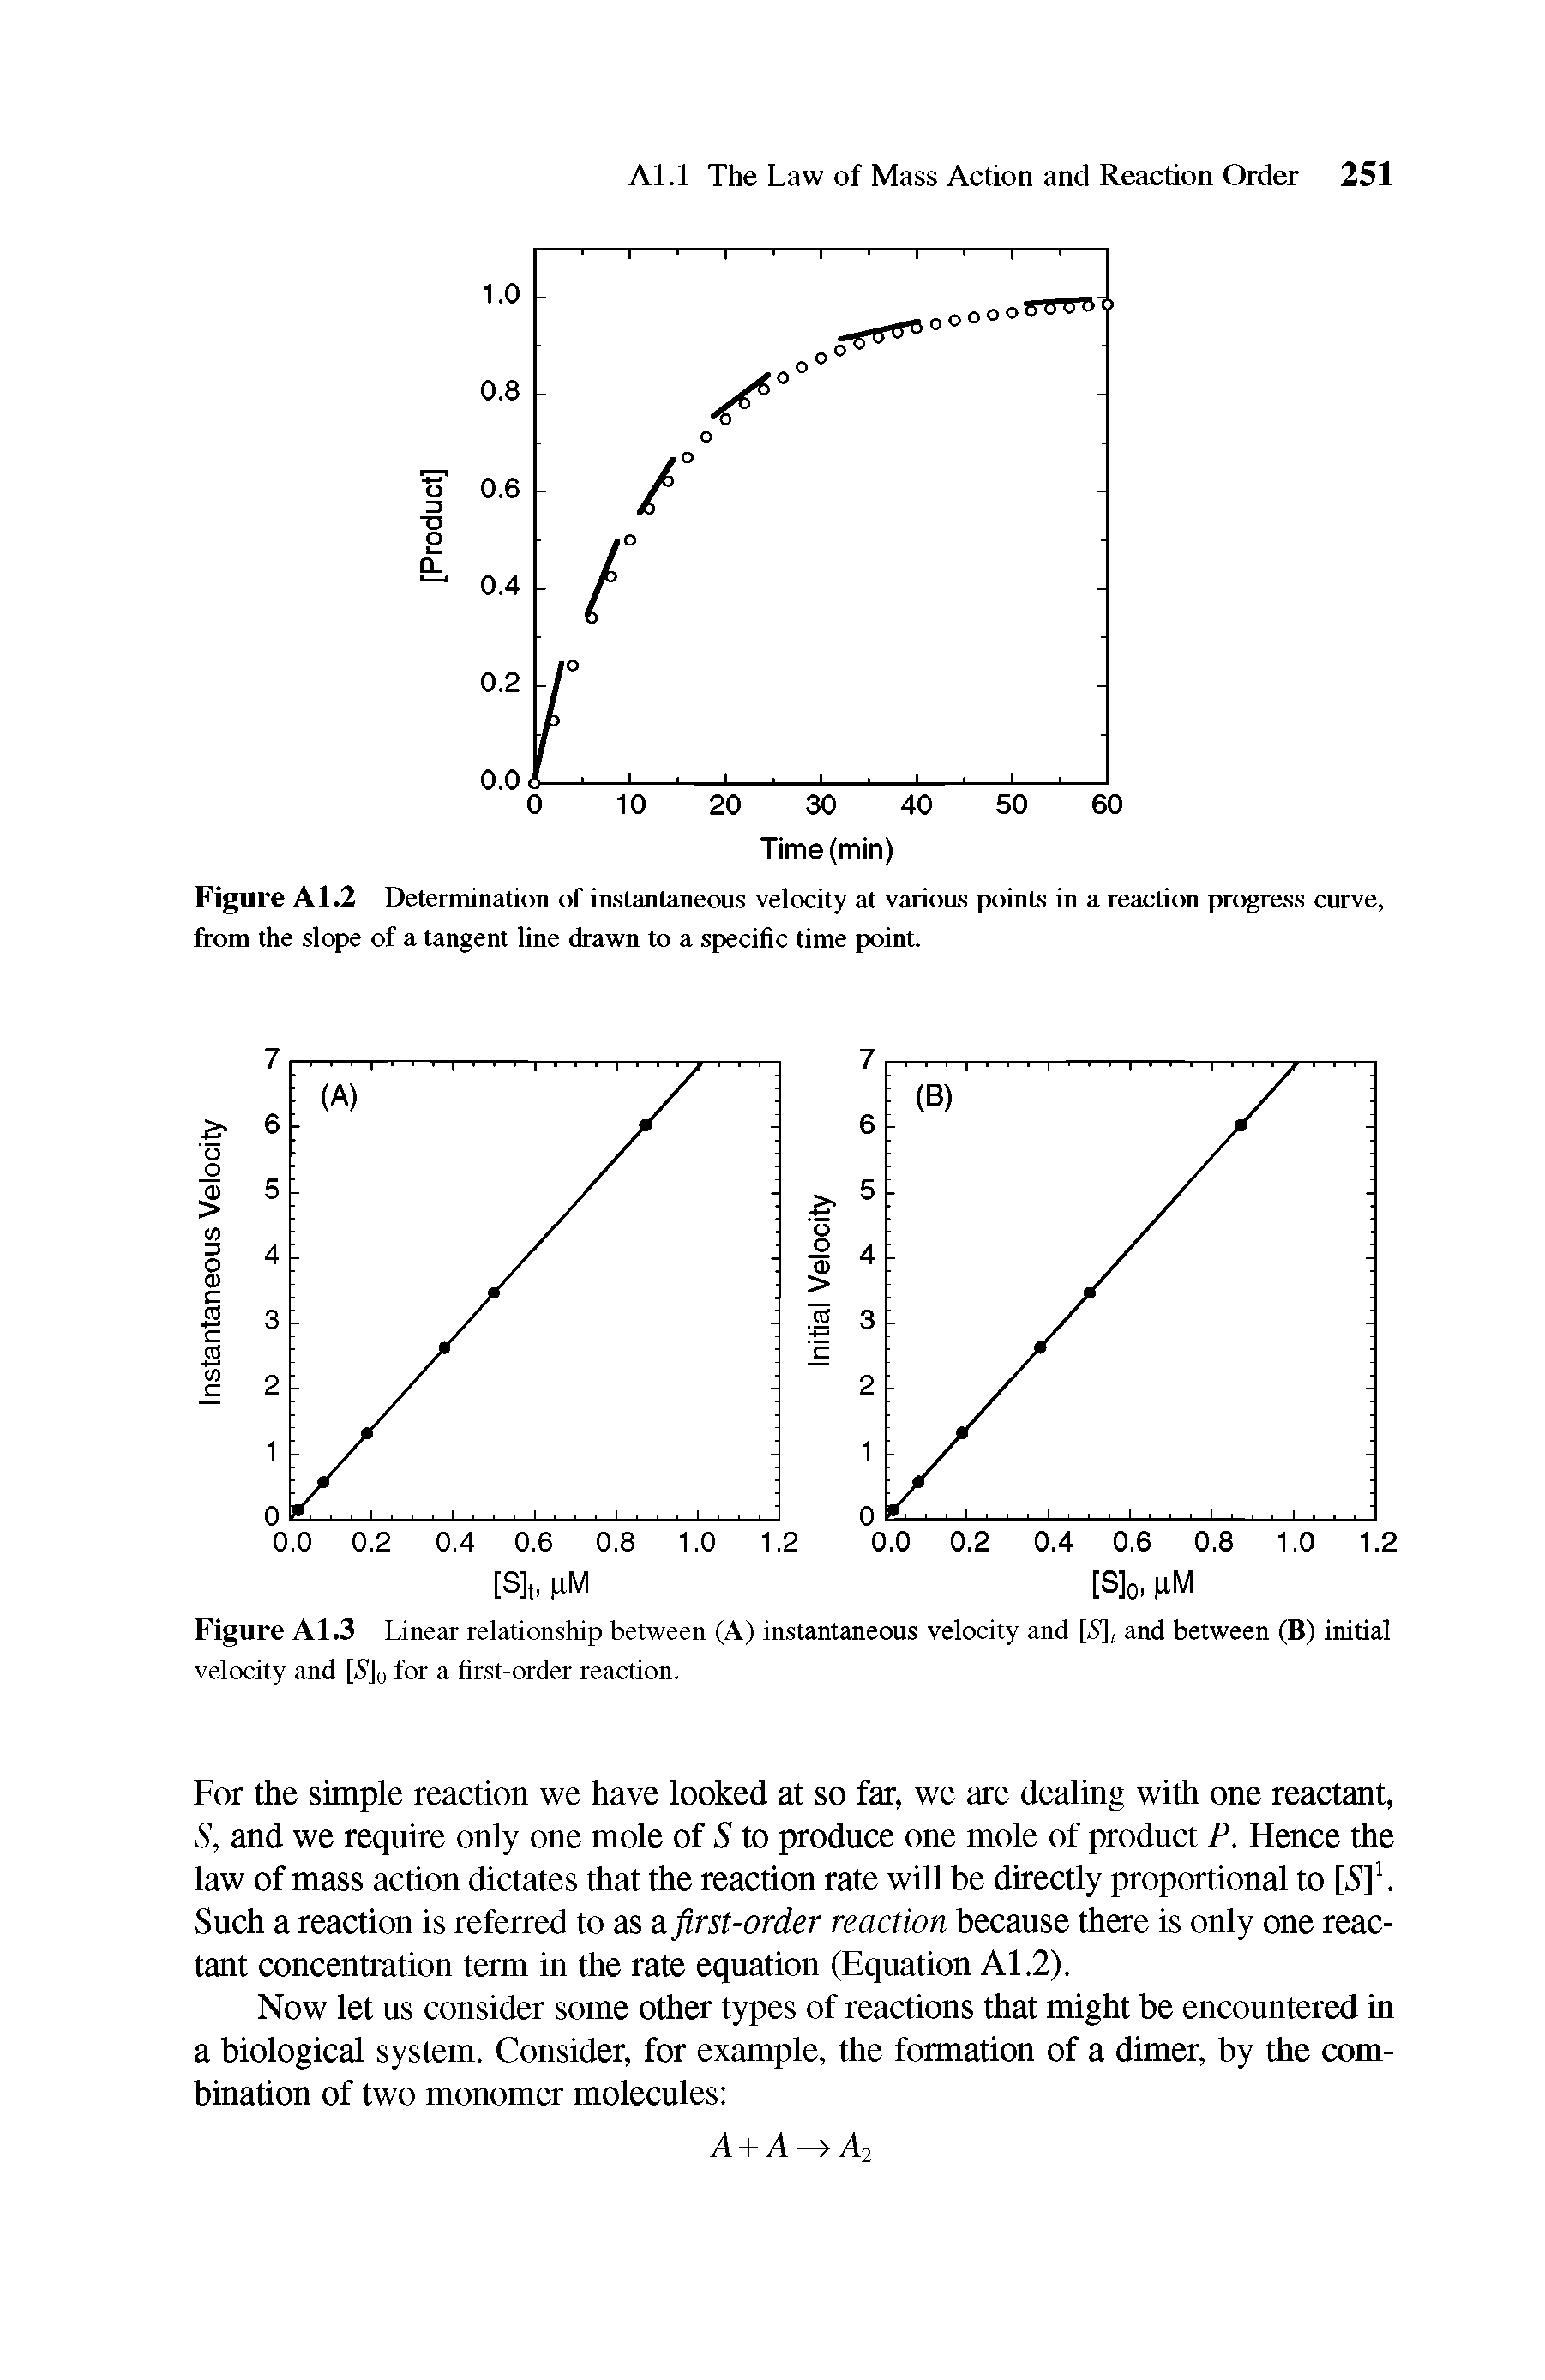 Figure A1.3 Linear relationship between (A) instantaneous velocity and [5], and between (B) initial velocity and [5]0 for a first-order reaction.